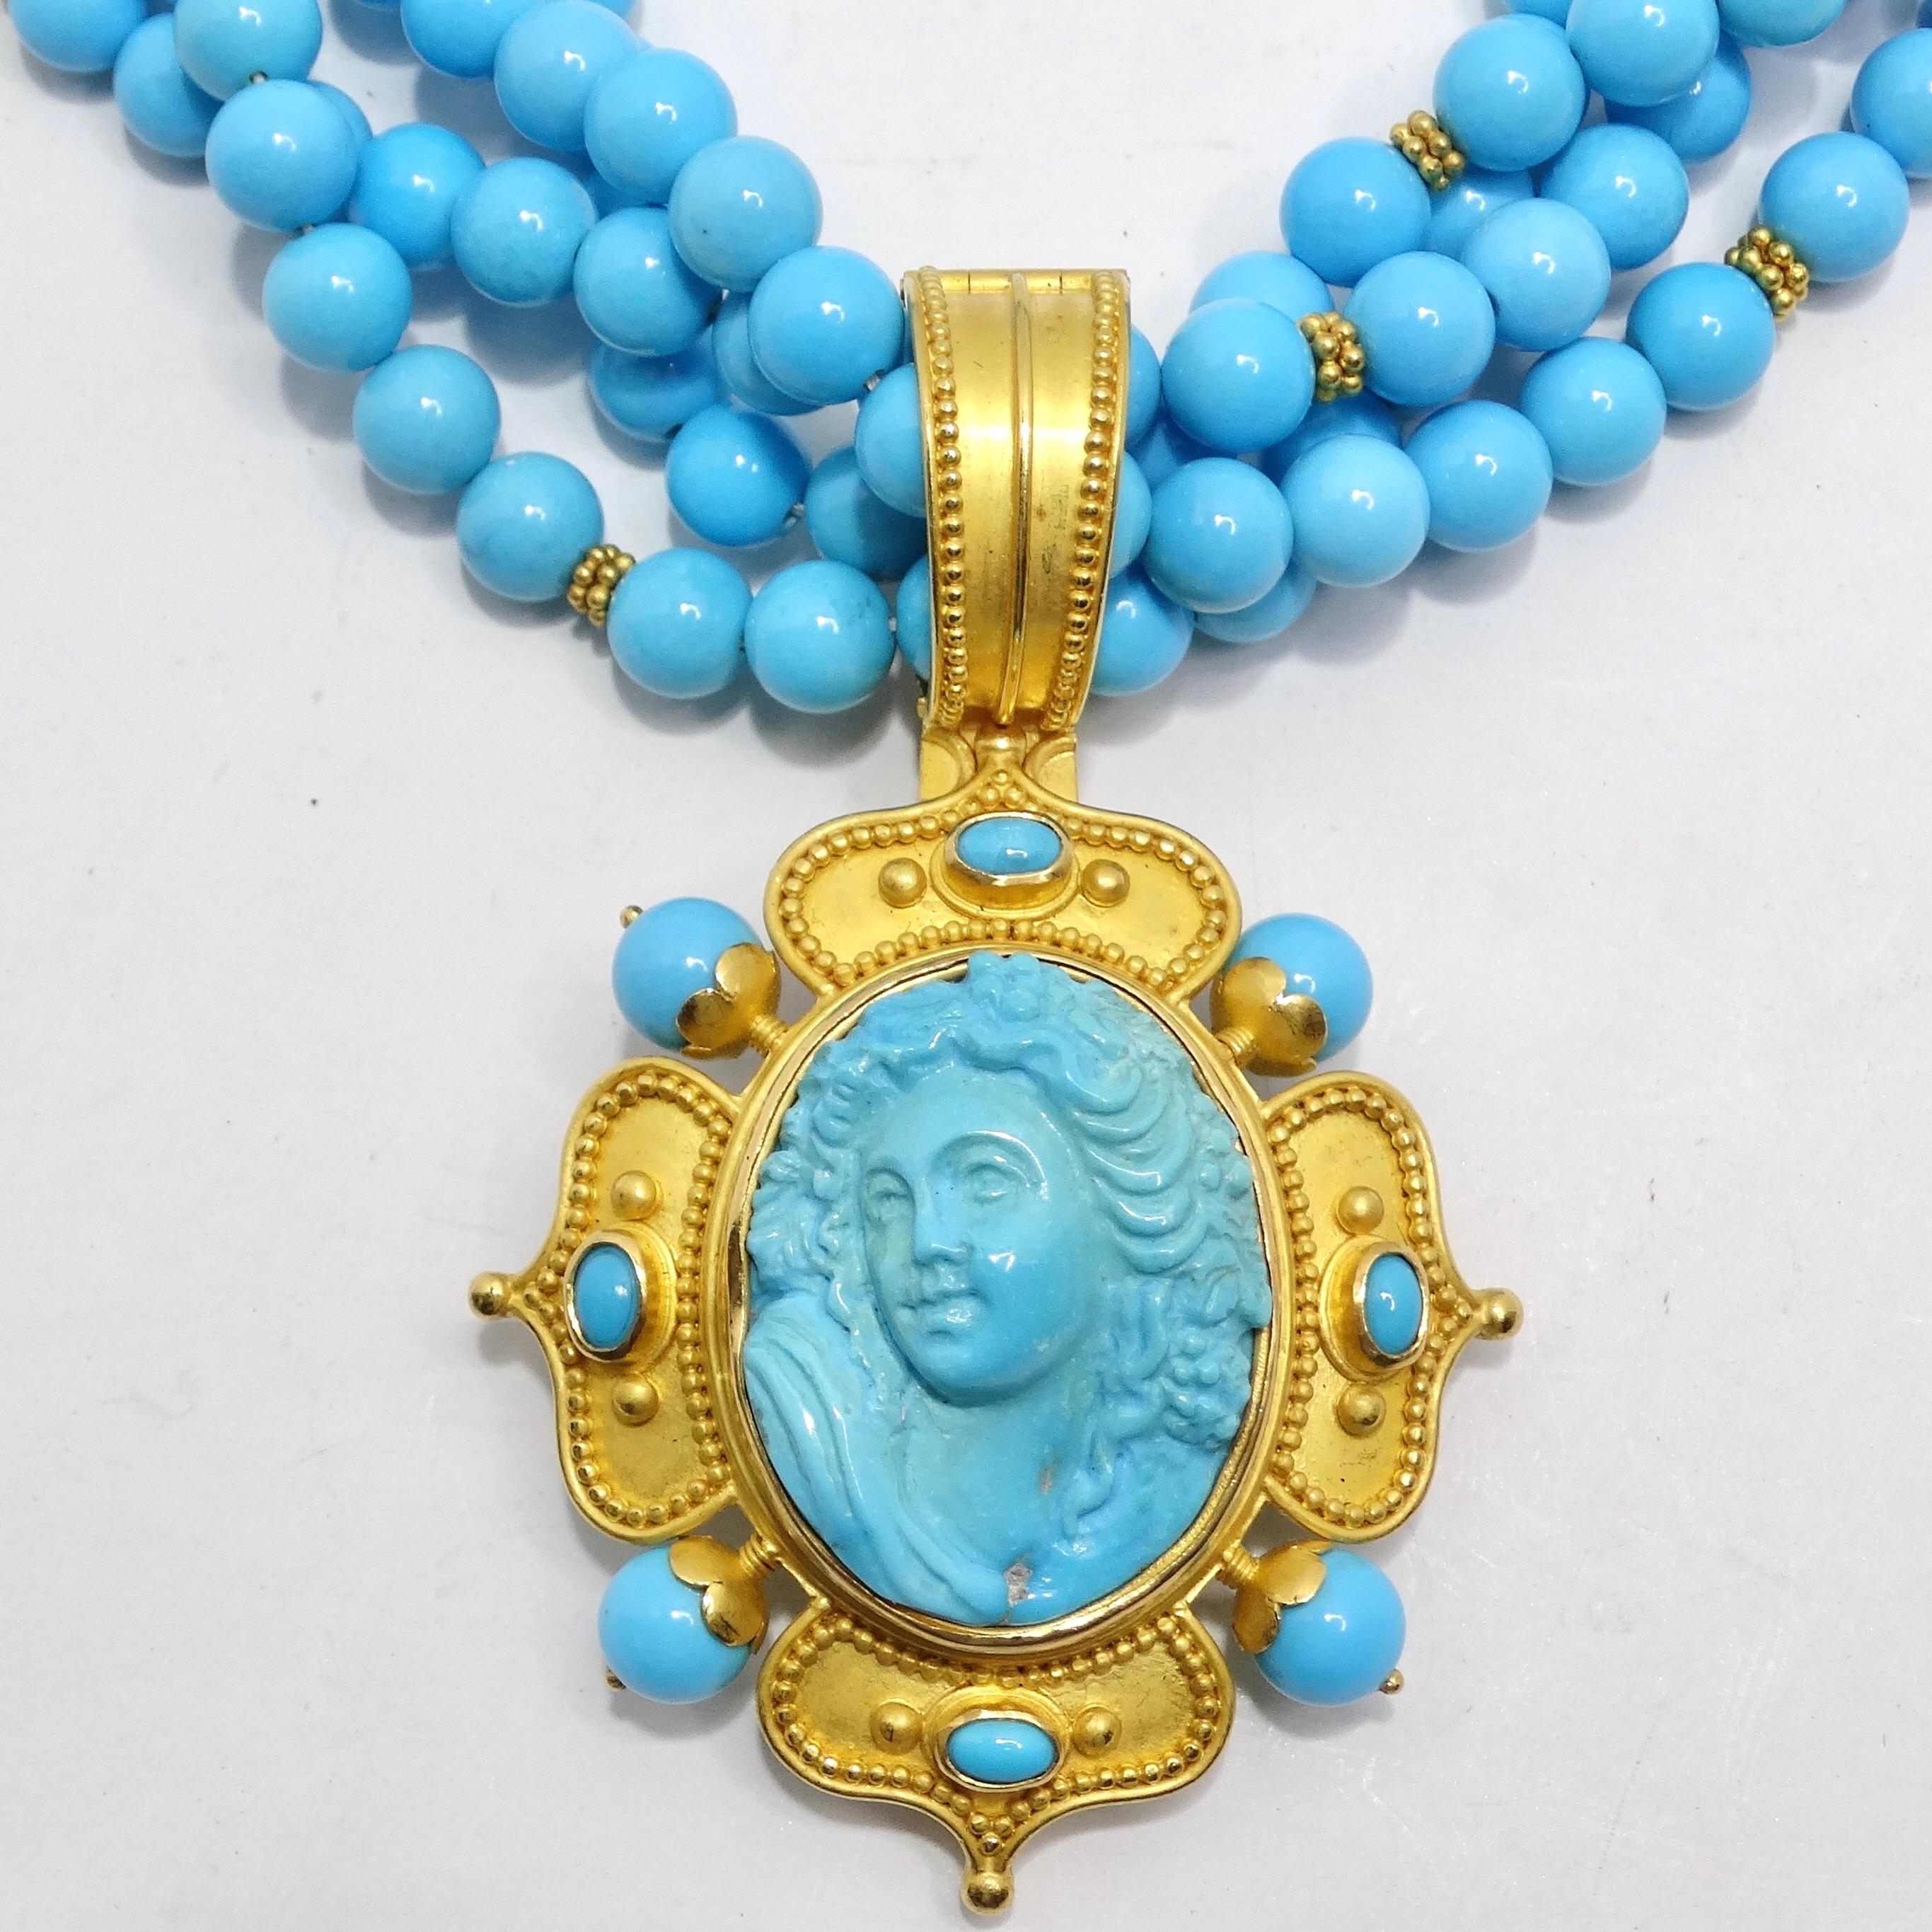 Introducing the Carolyn Tyler 22K Gold Sleeping Beauty Turquoise Cameo Pendant Necklace, a luxurious and captivating piece of jewelry that's bound to become the centerpiece of your collection. Crafted with multi strands of Sleeping Beauty turquoise